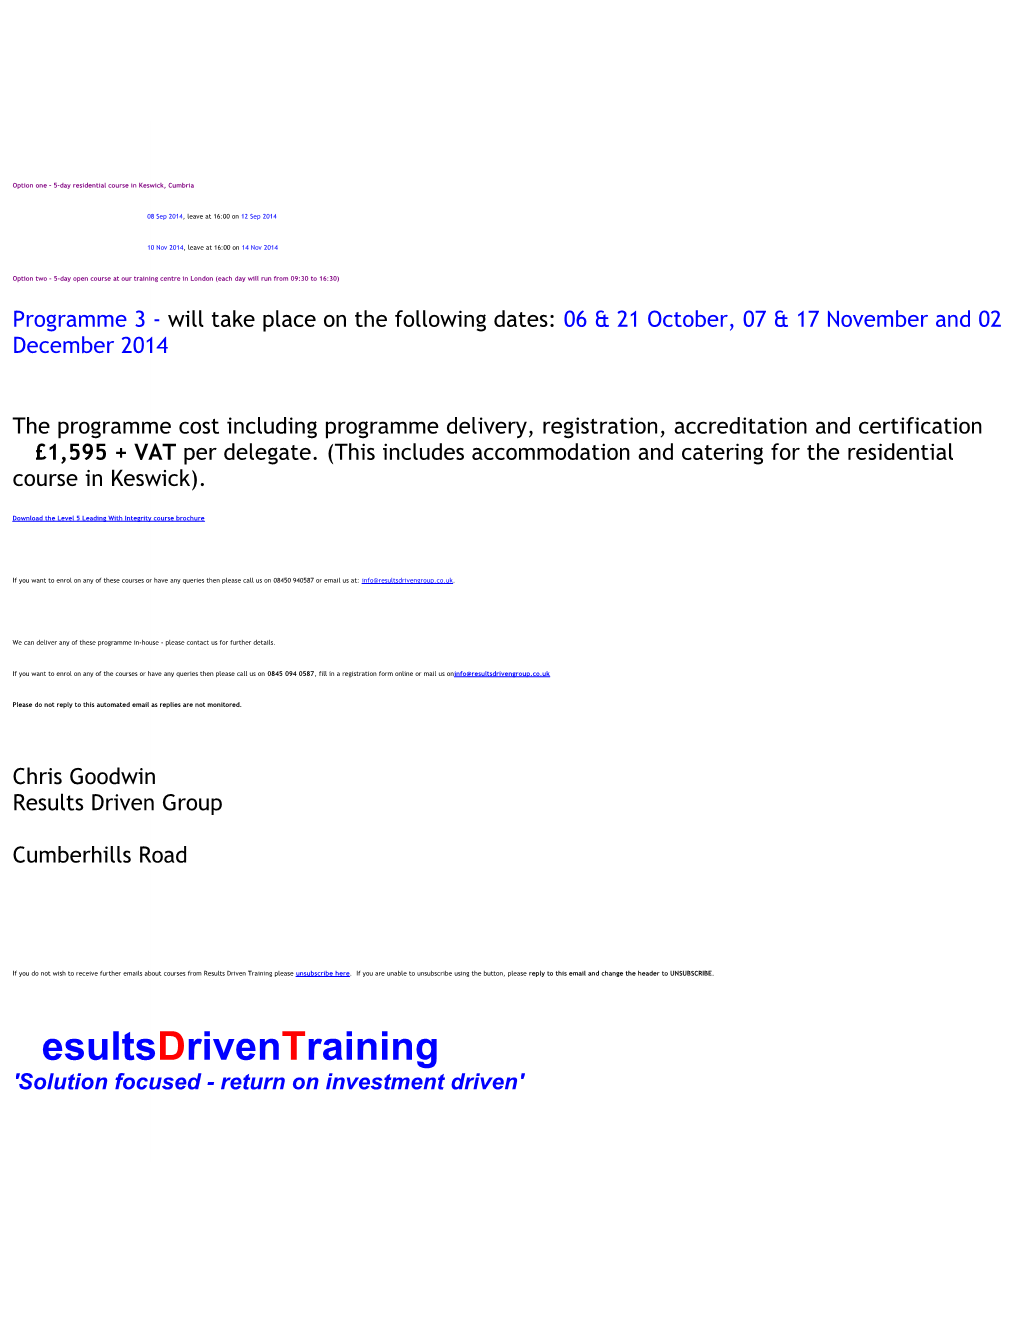 ILM Level 5 Leadership & Management Qualifications from the Results Driven Group in 2014